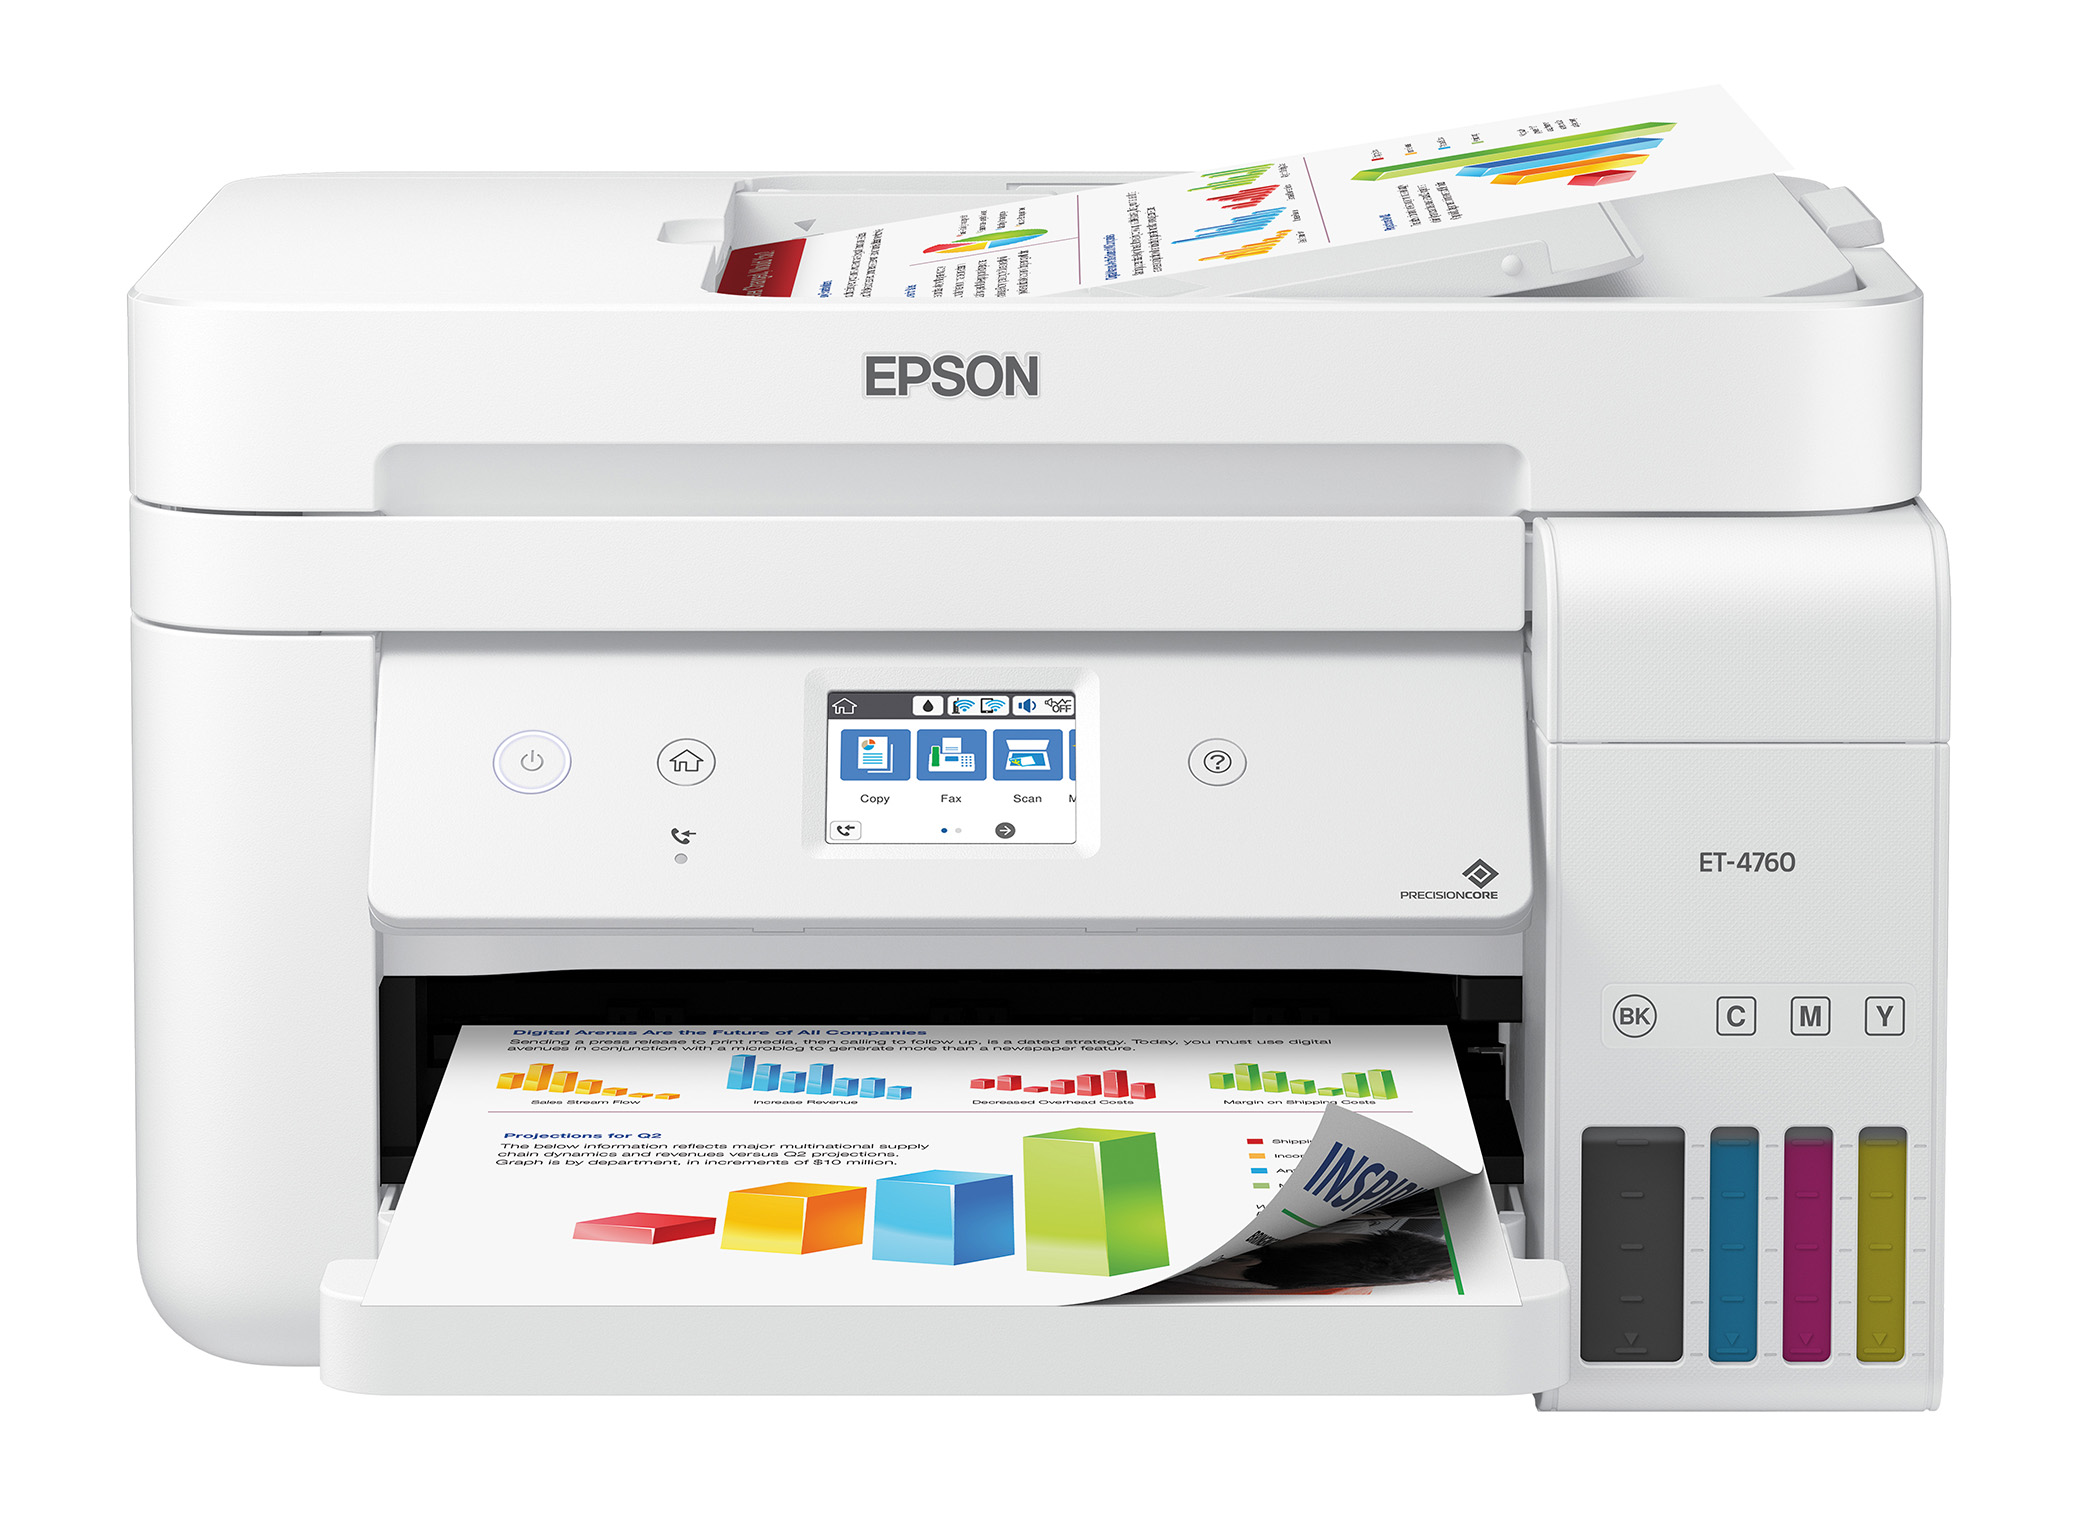 The EcoTank ET-4760 takes the worry out of running out of ink while printing business proposals, lesson plans, or homework assignments as a cartridge-free all-in-one Supertank printer.